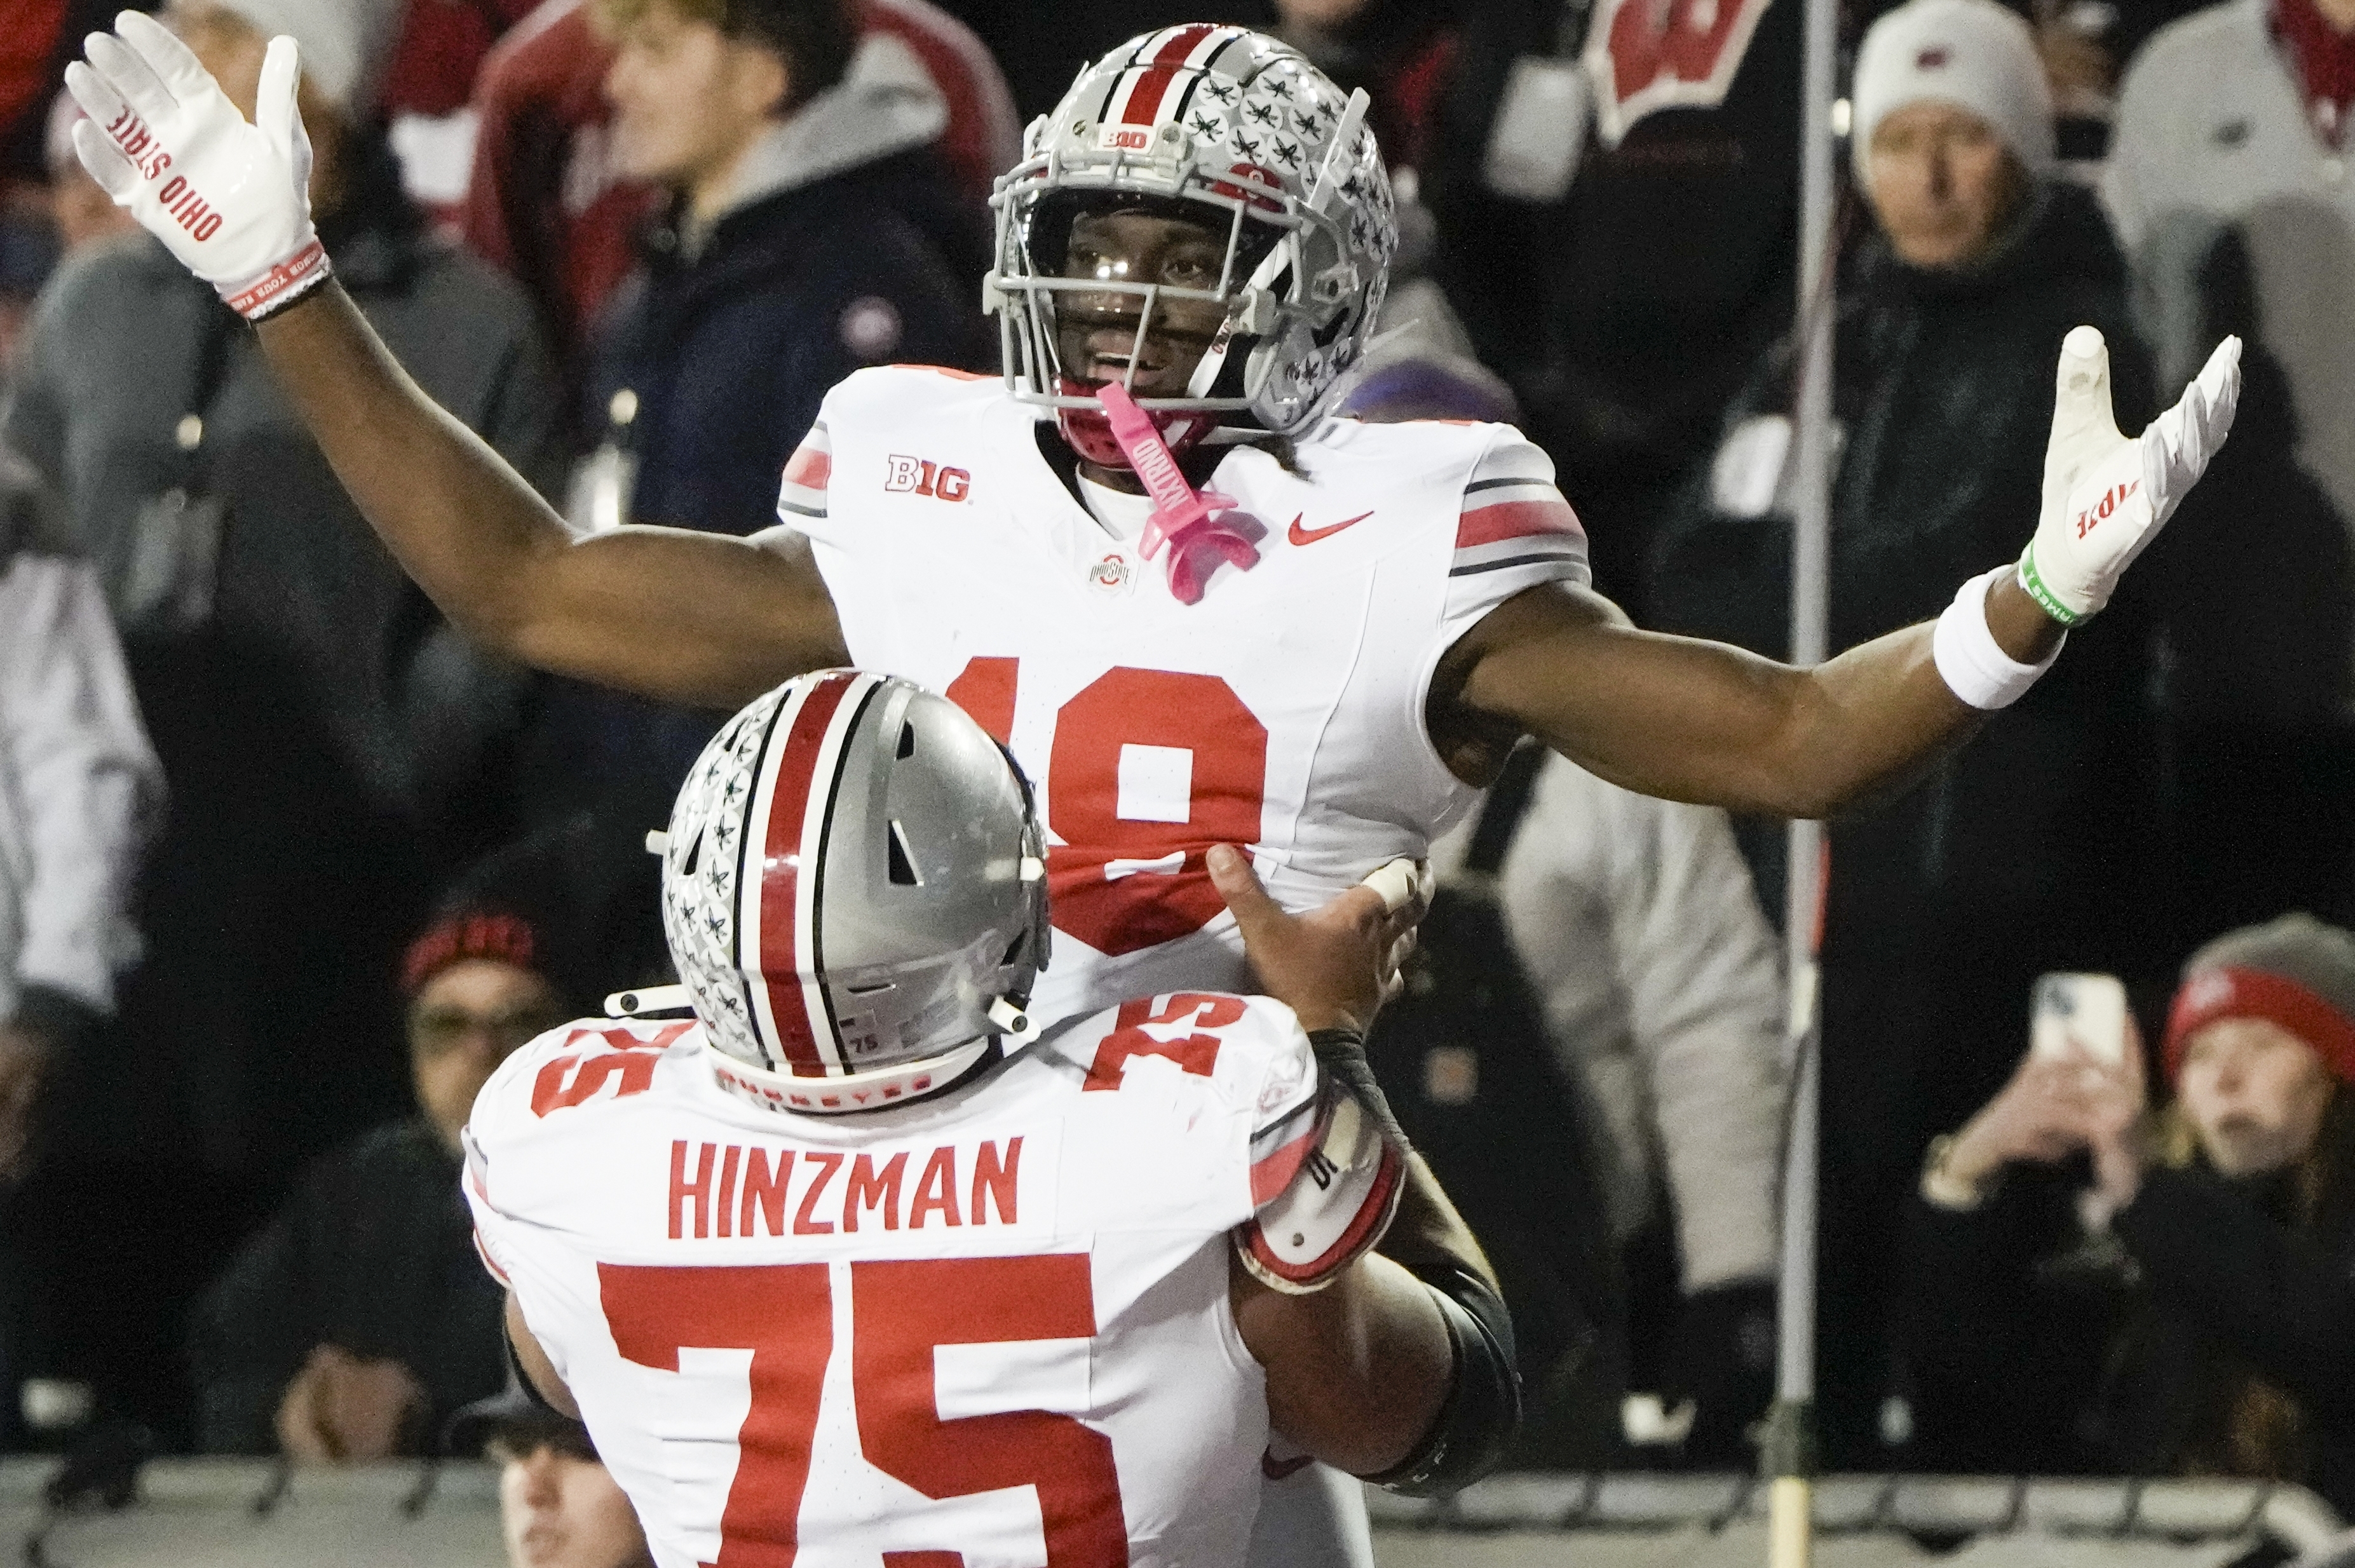 We'll Talk About This Later: Ohio State's Marvin Harrison Jr